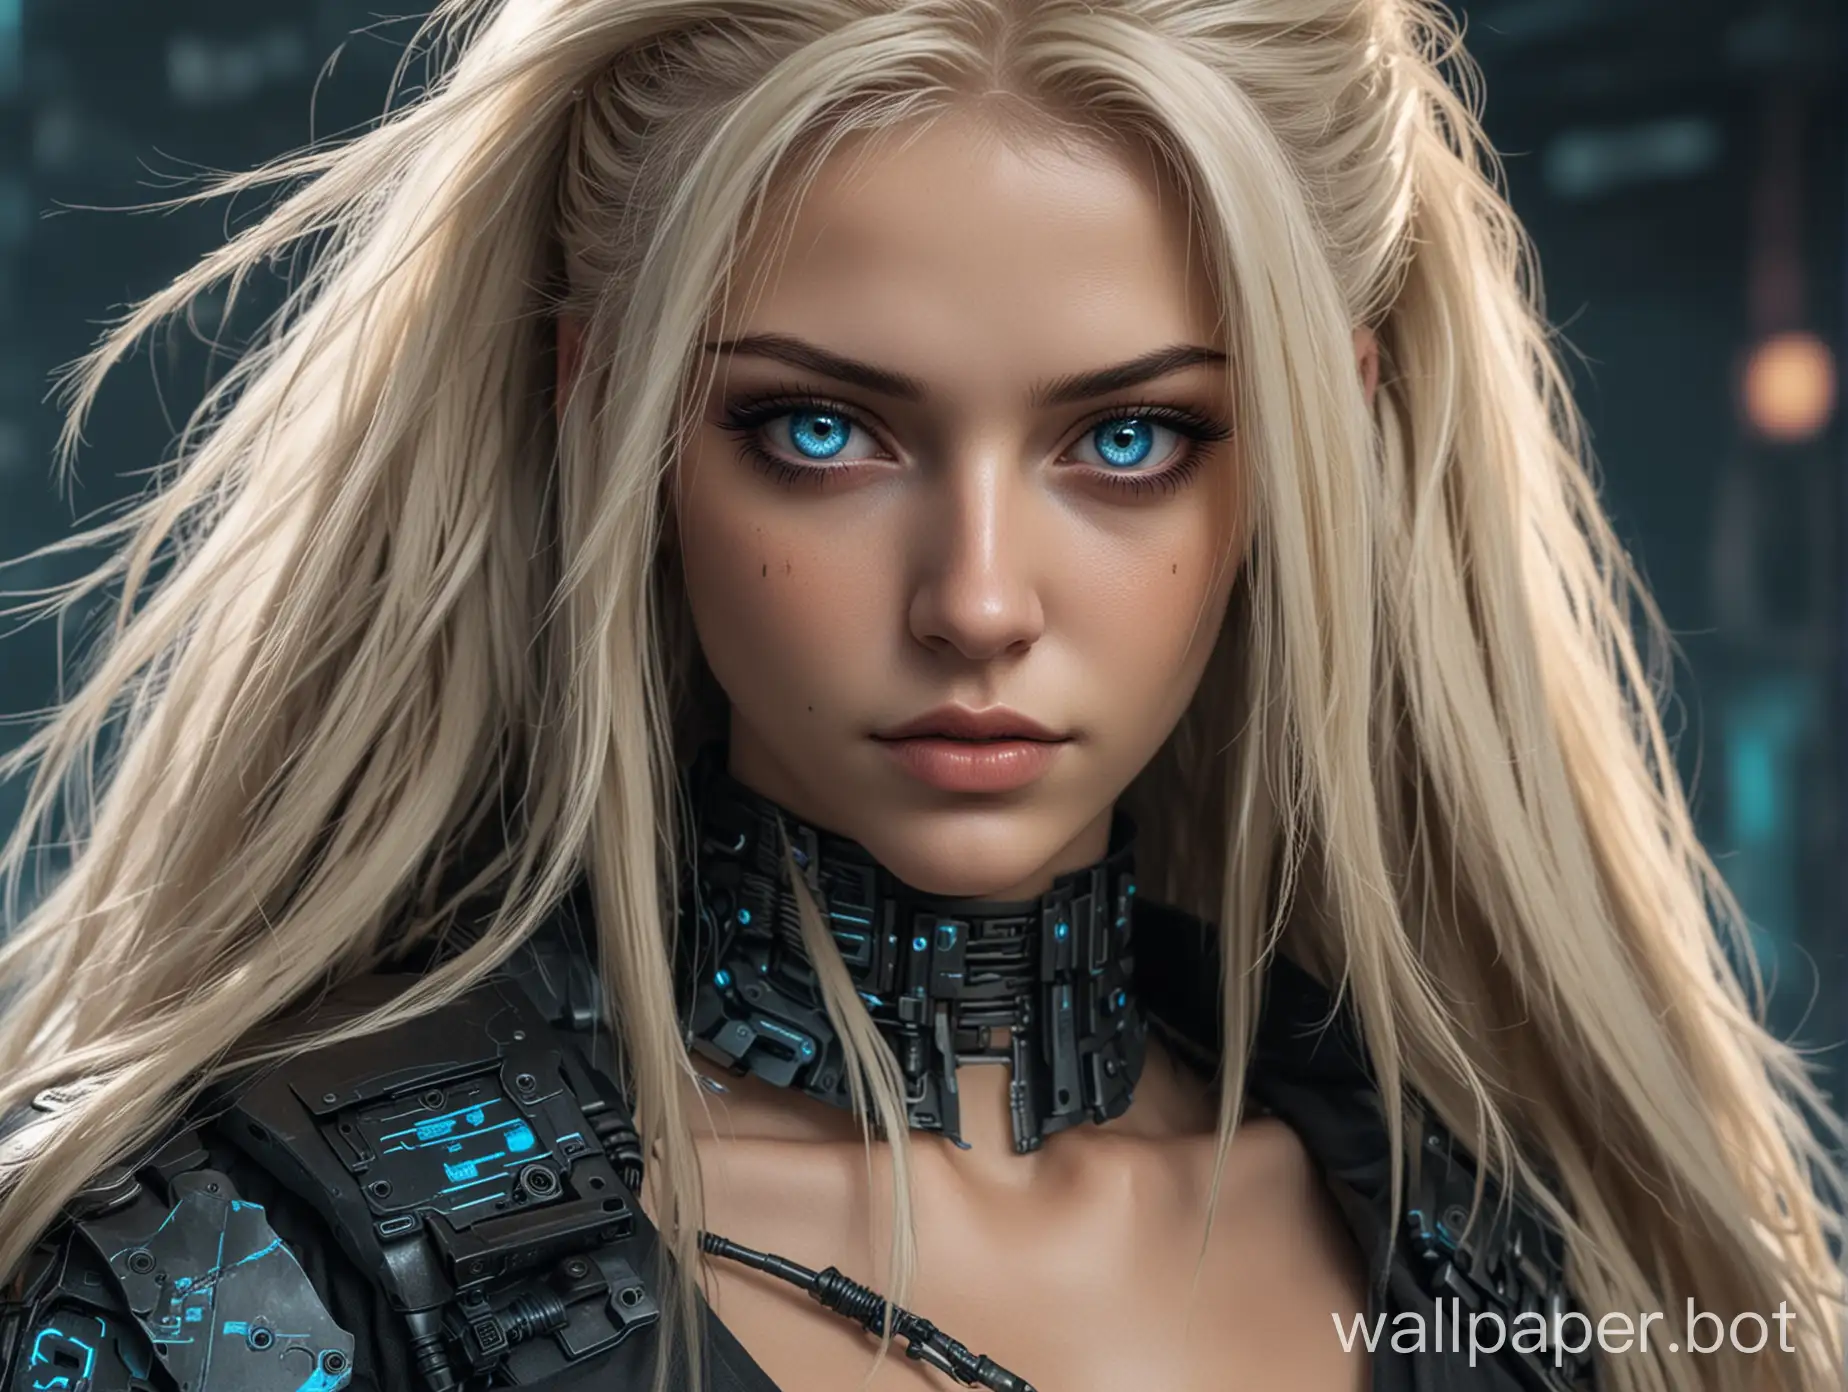 Futuristic-Cyberpunk-Woman-with-Long-Blonde-Hair-and-Blue-Eyes